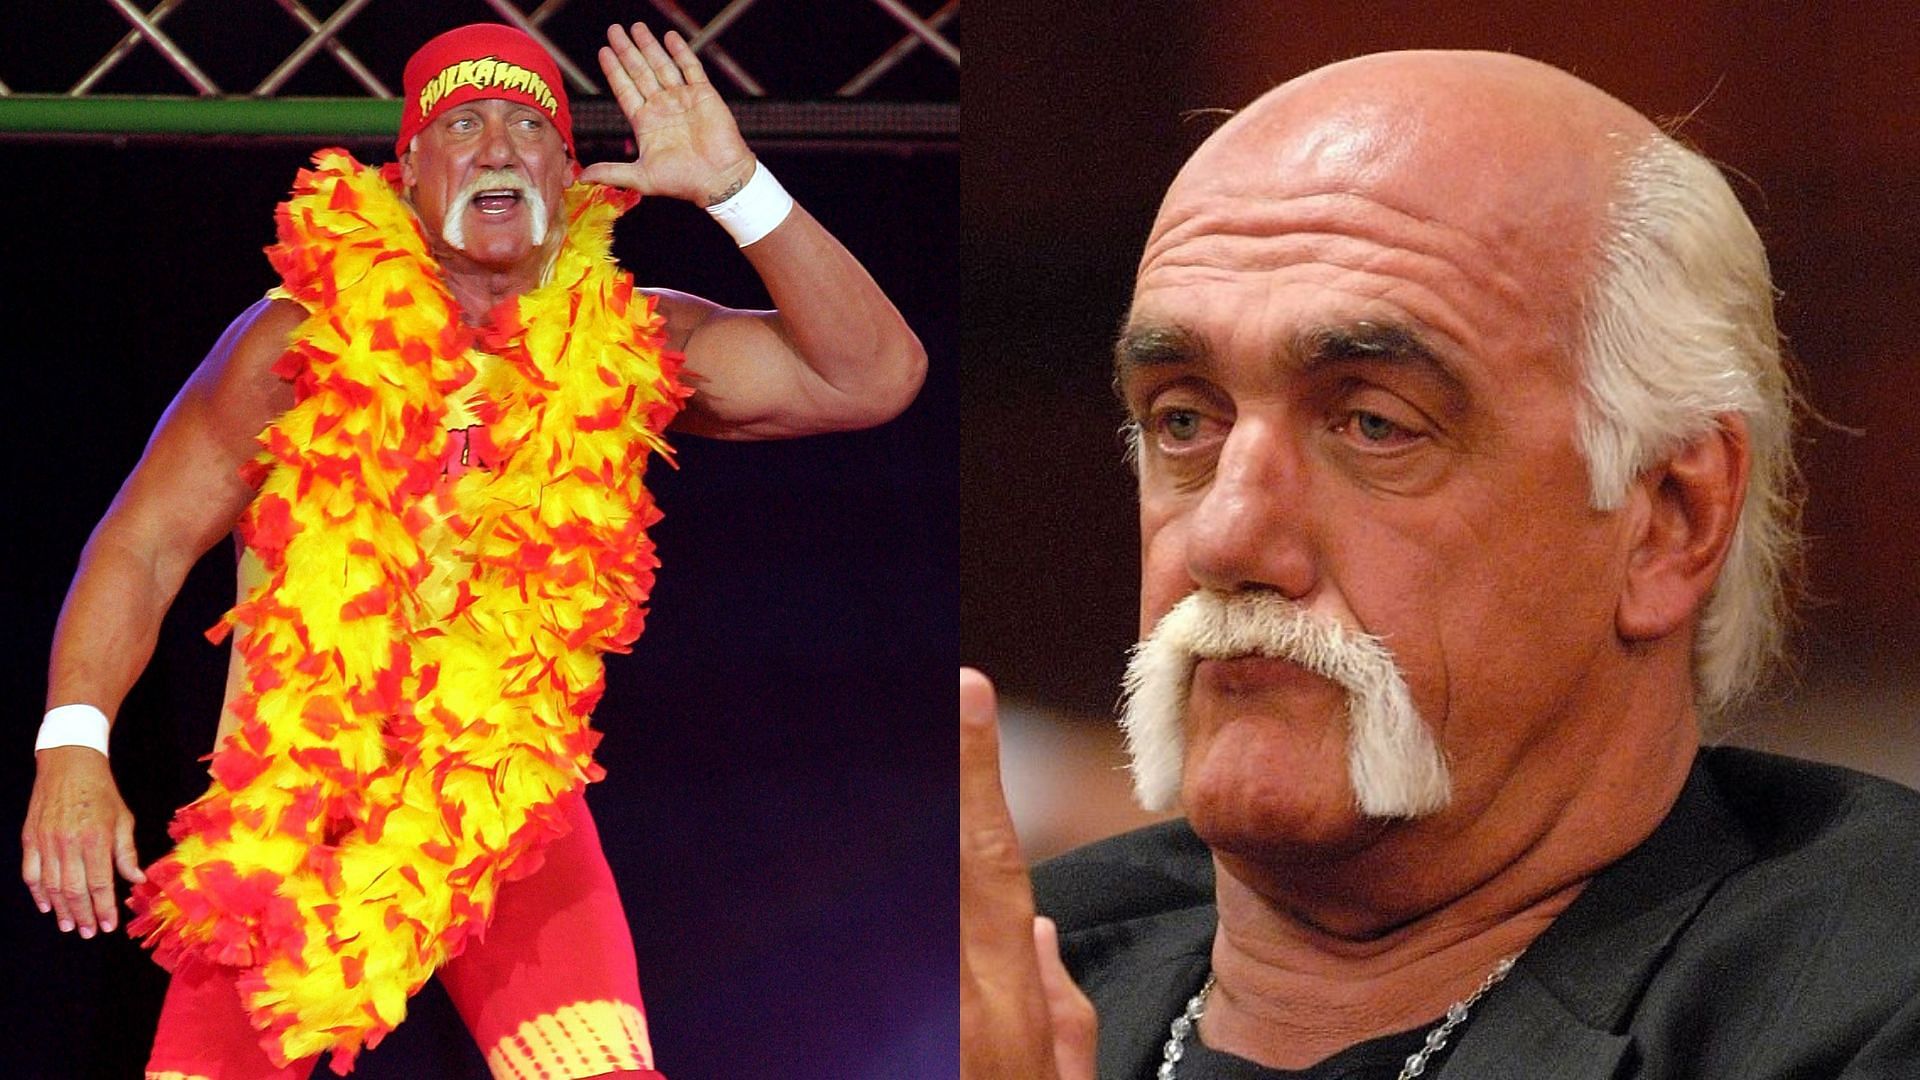 Hulk Hogan is still one of the most popular wrestling stars of all time.